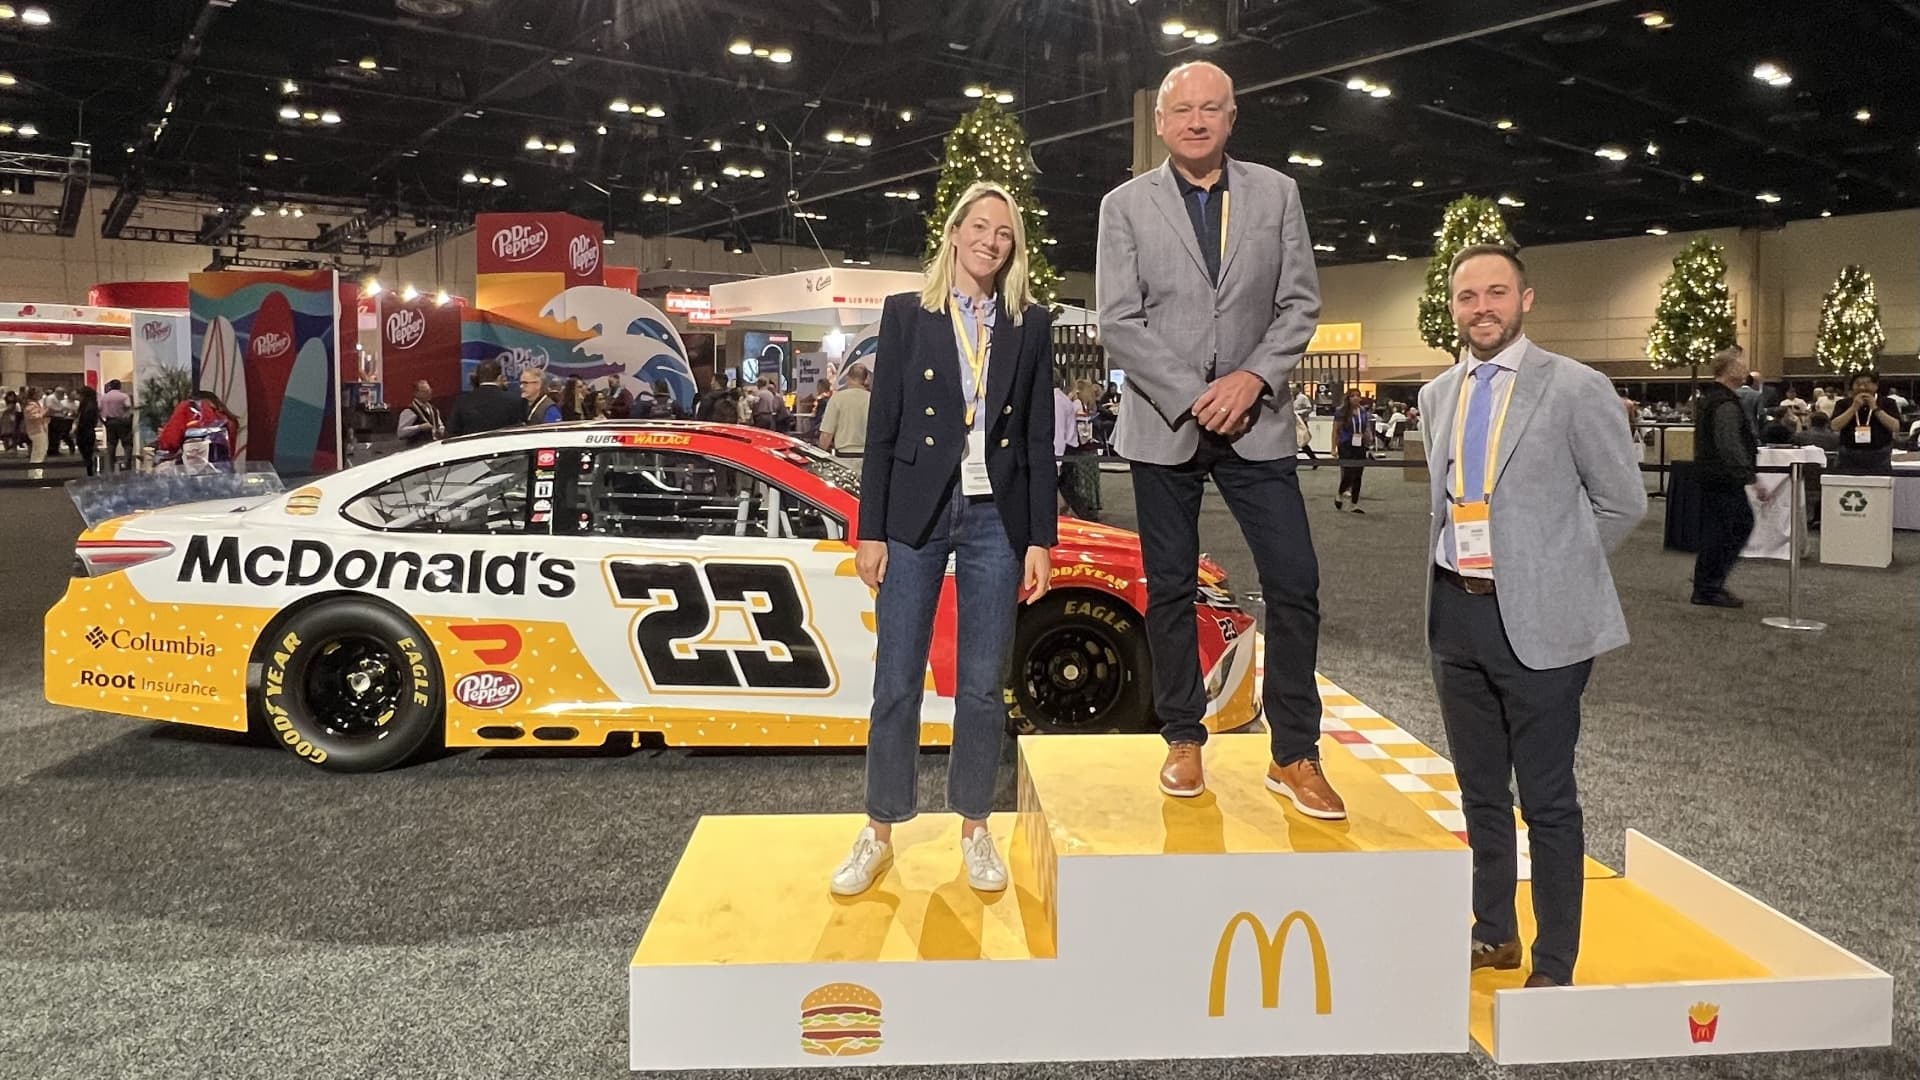 Paul Hendel and his children Lauren and Mark at a recent McDonald's event for employees.